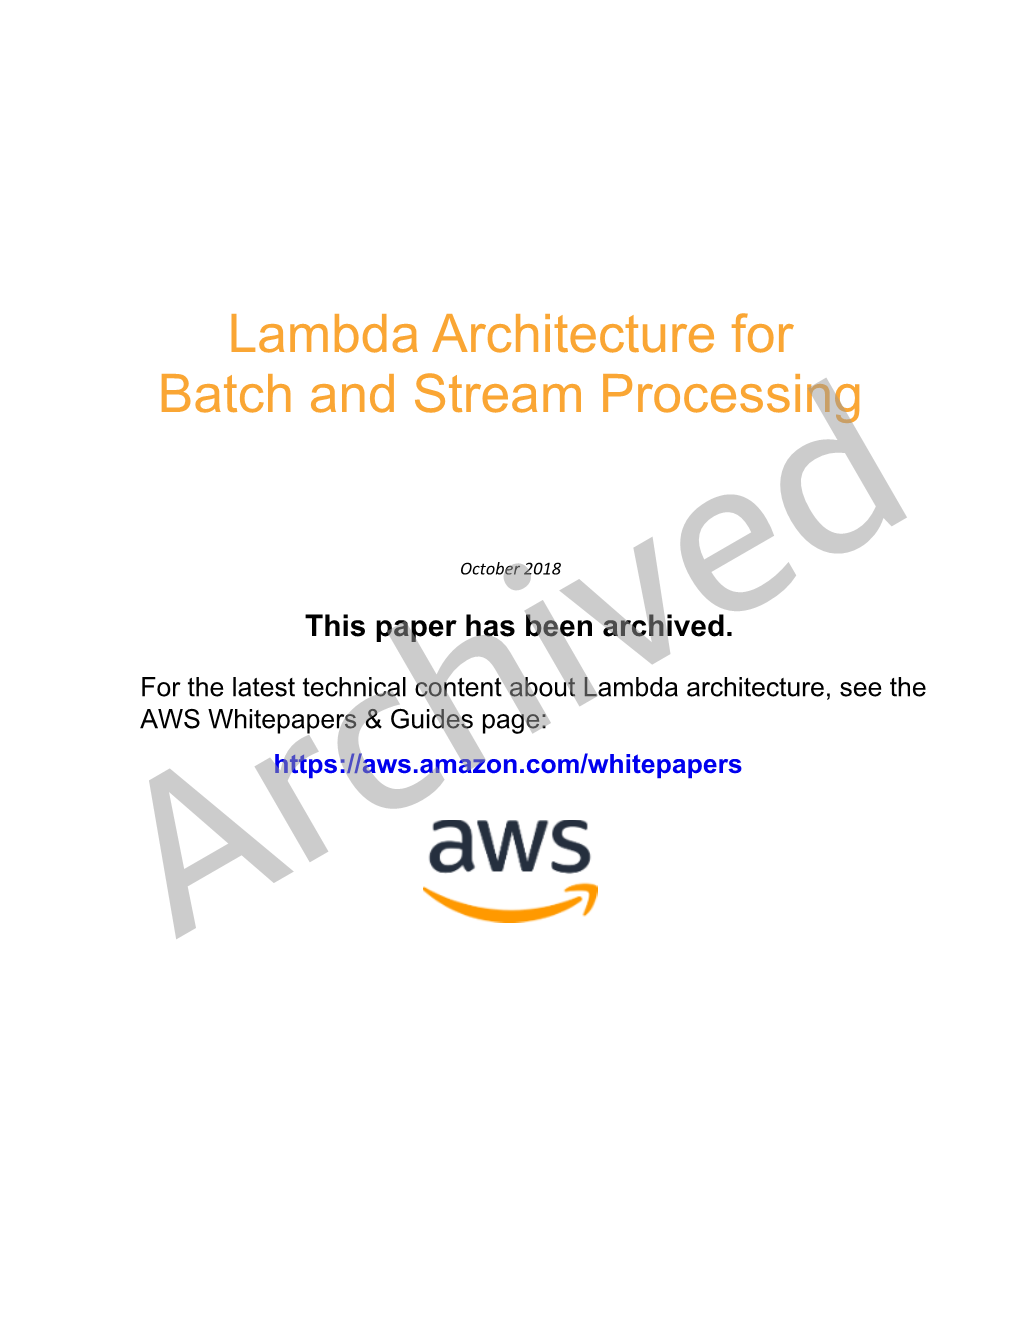 ARCHIVED: Lambda Architecture for Batch and Stream Processing